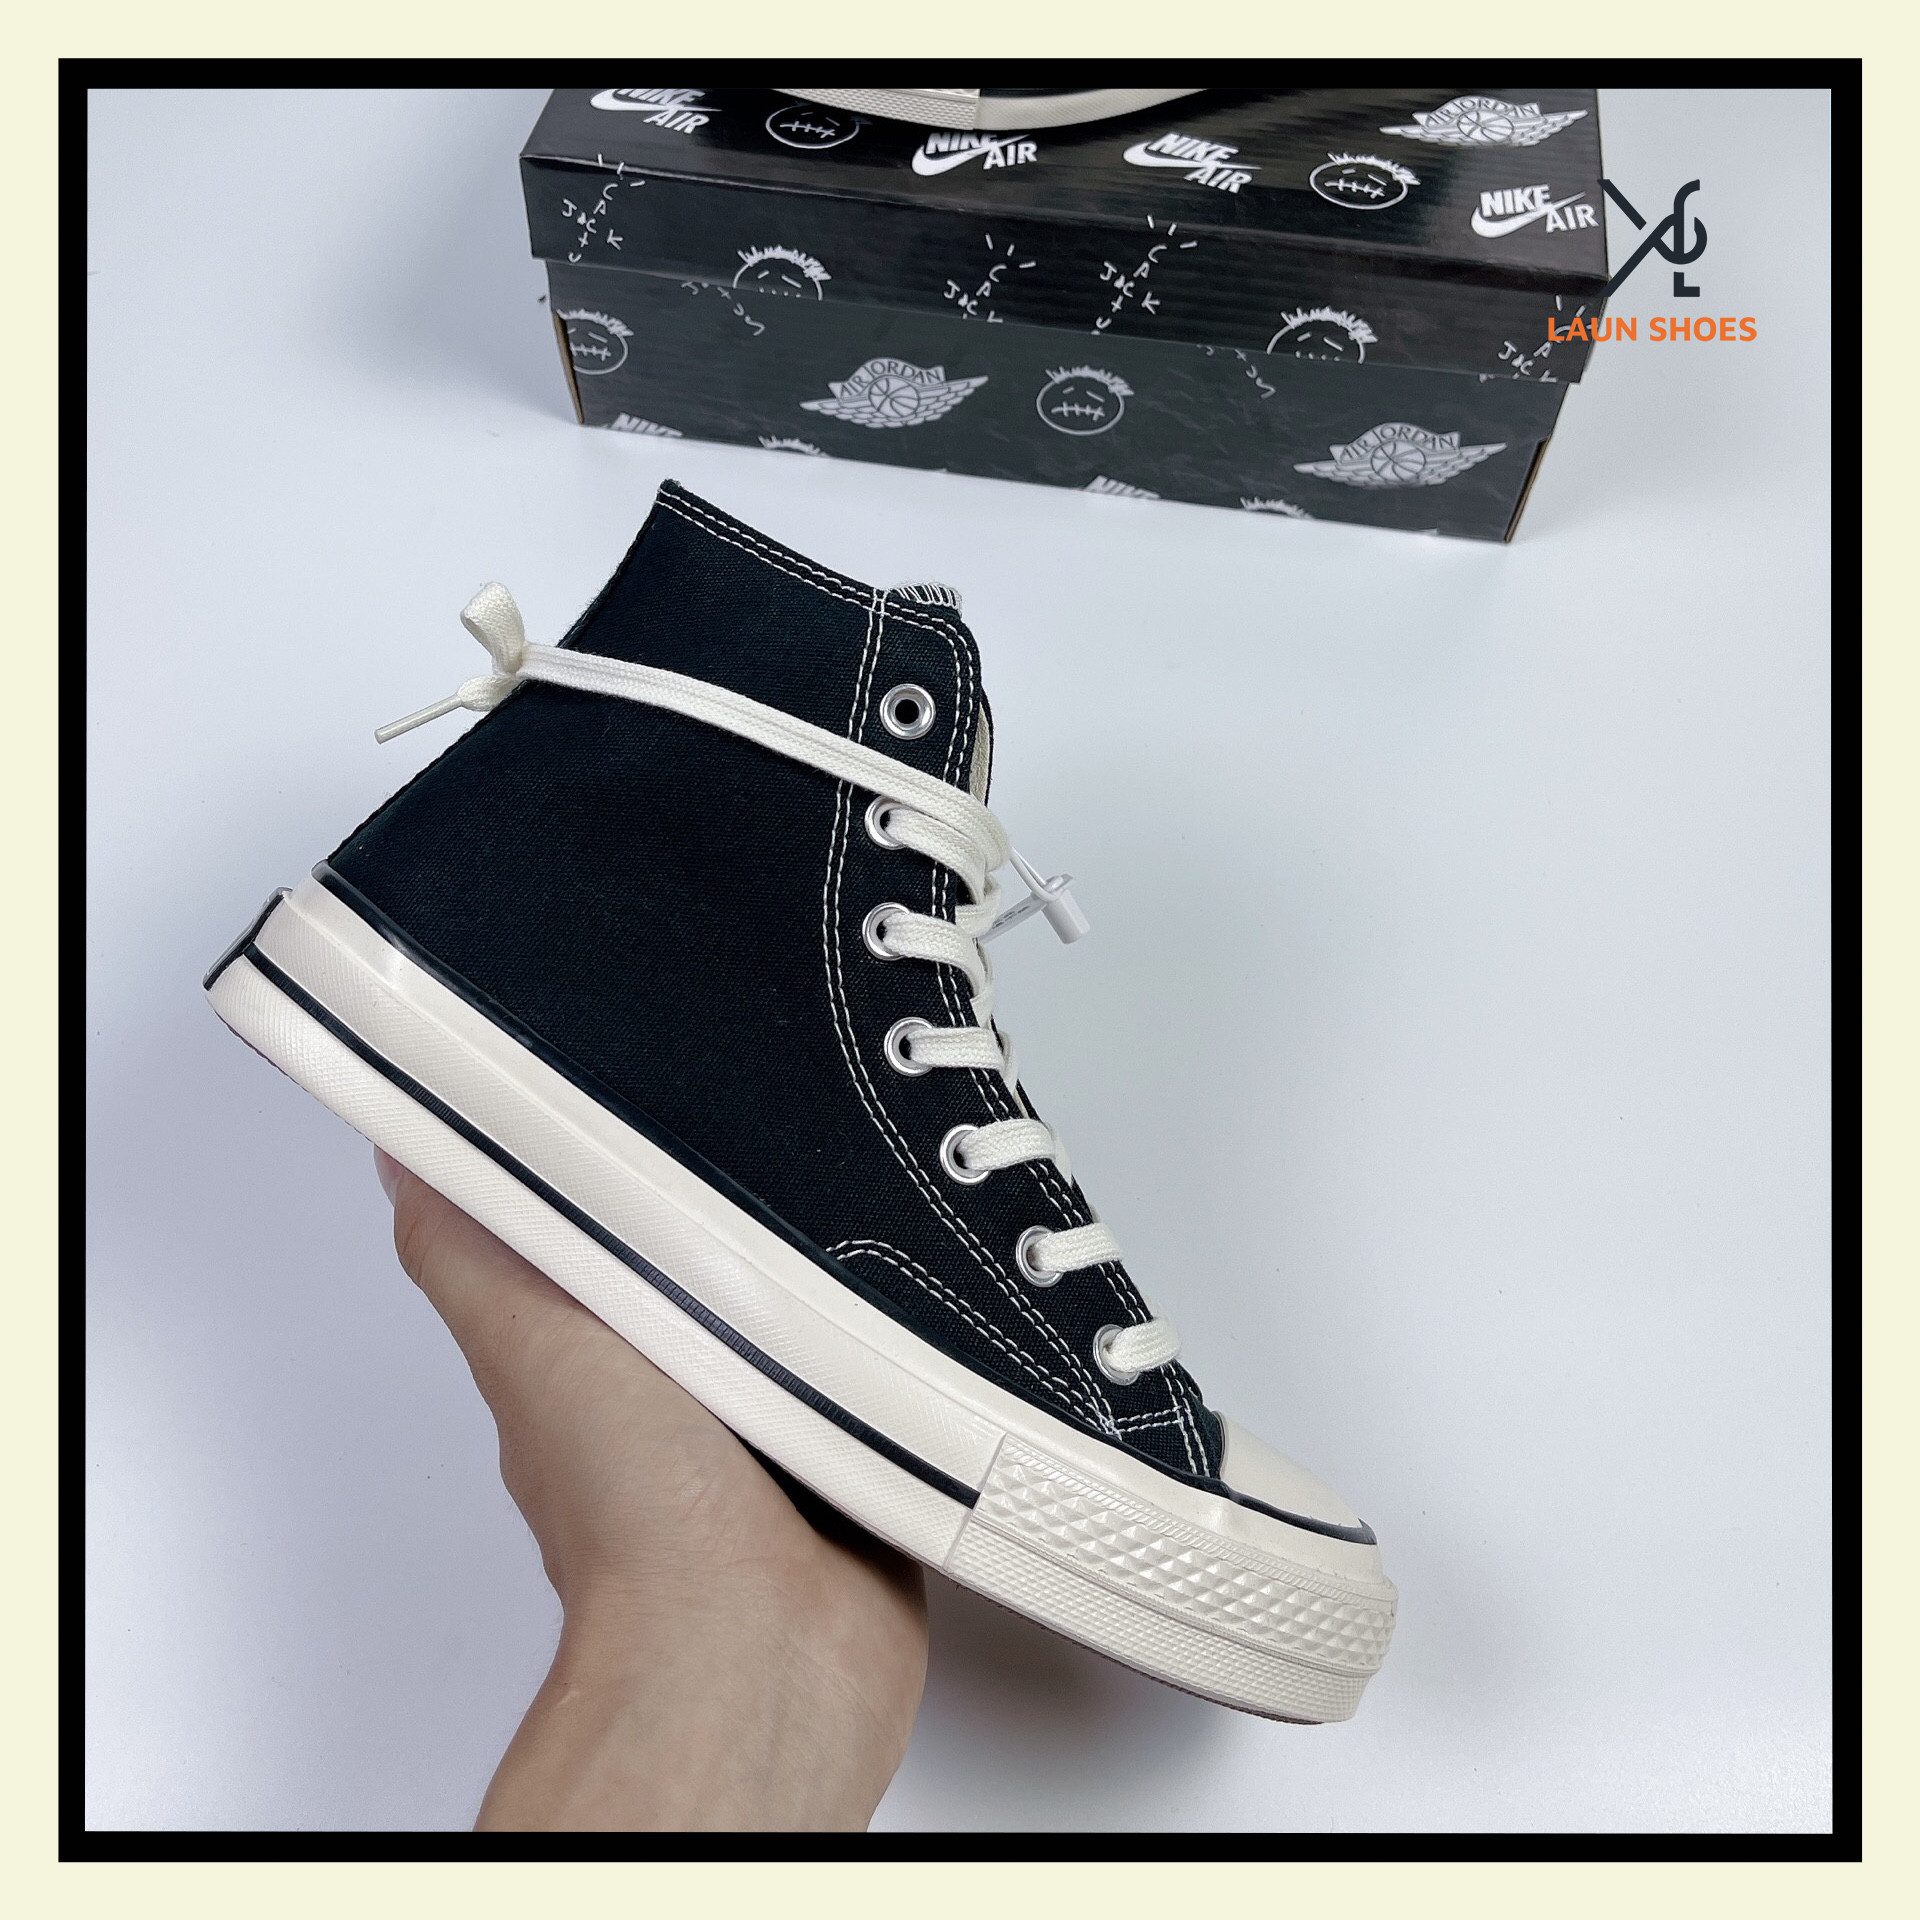 Converse Chuck Taylor All Star 1970s Black High Rep 1:1 - LaunShoes - Giày  thể thao